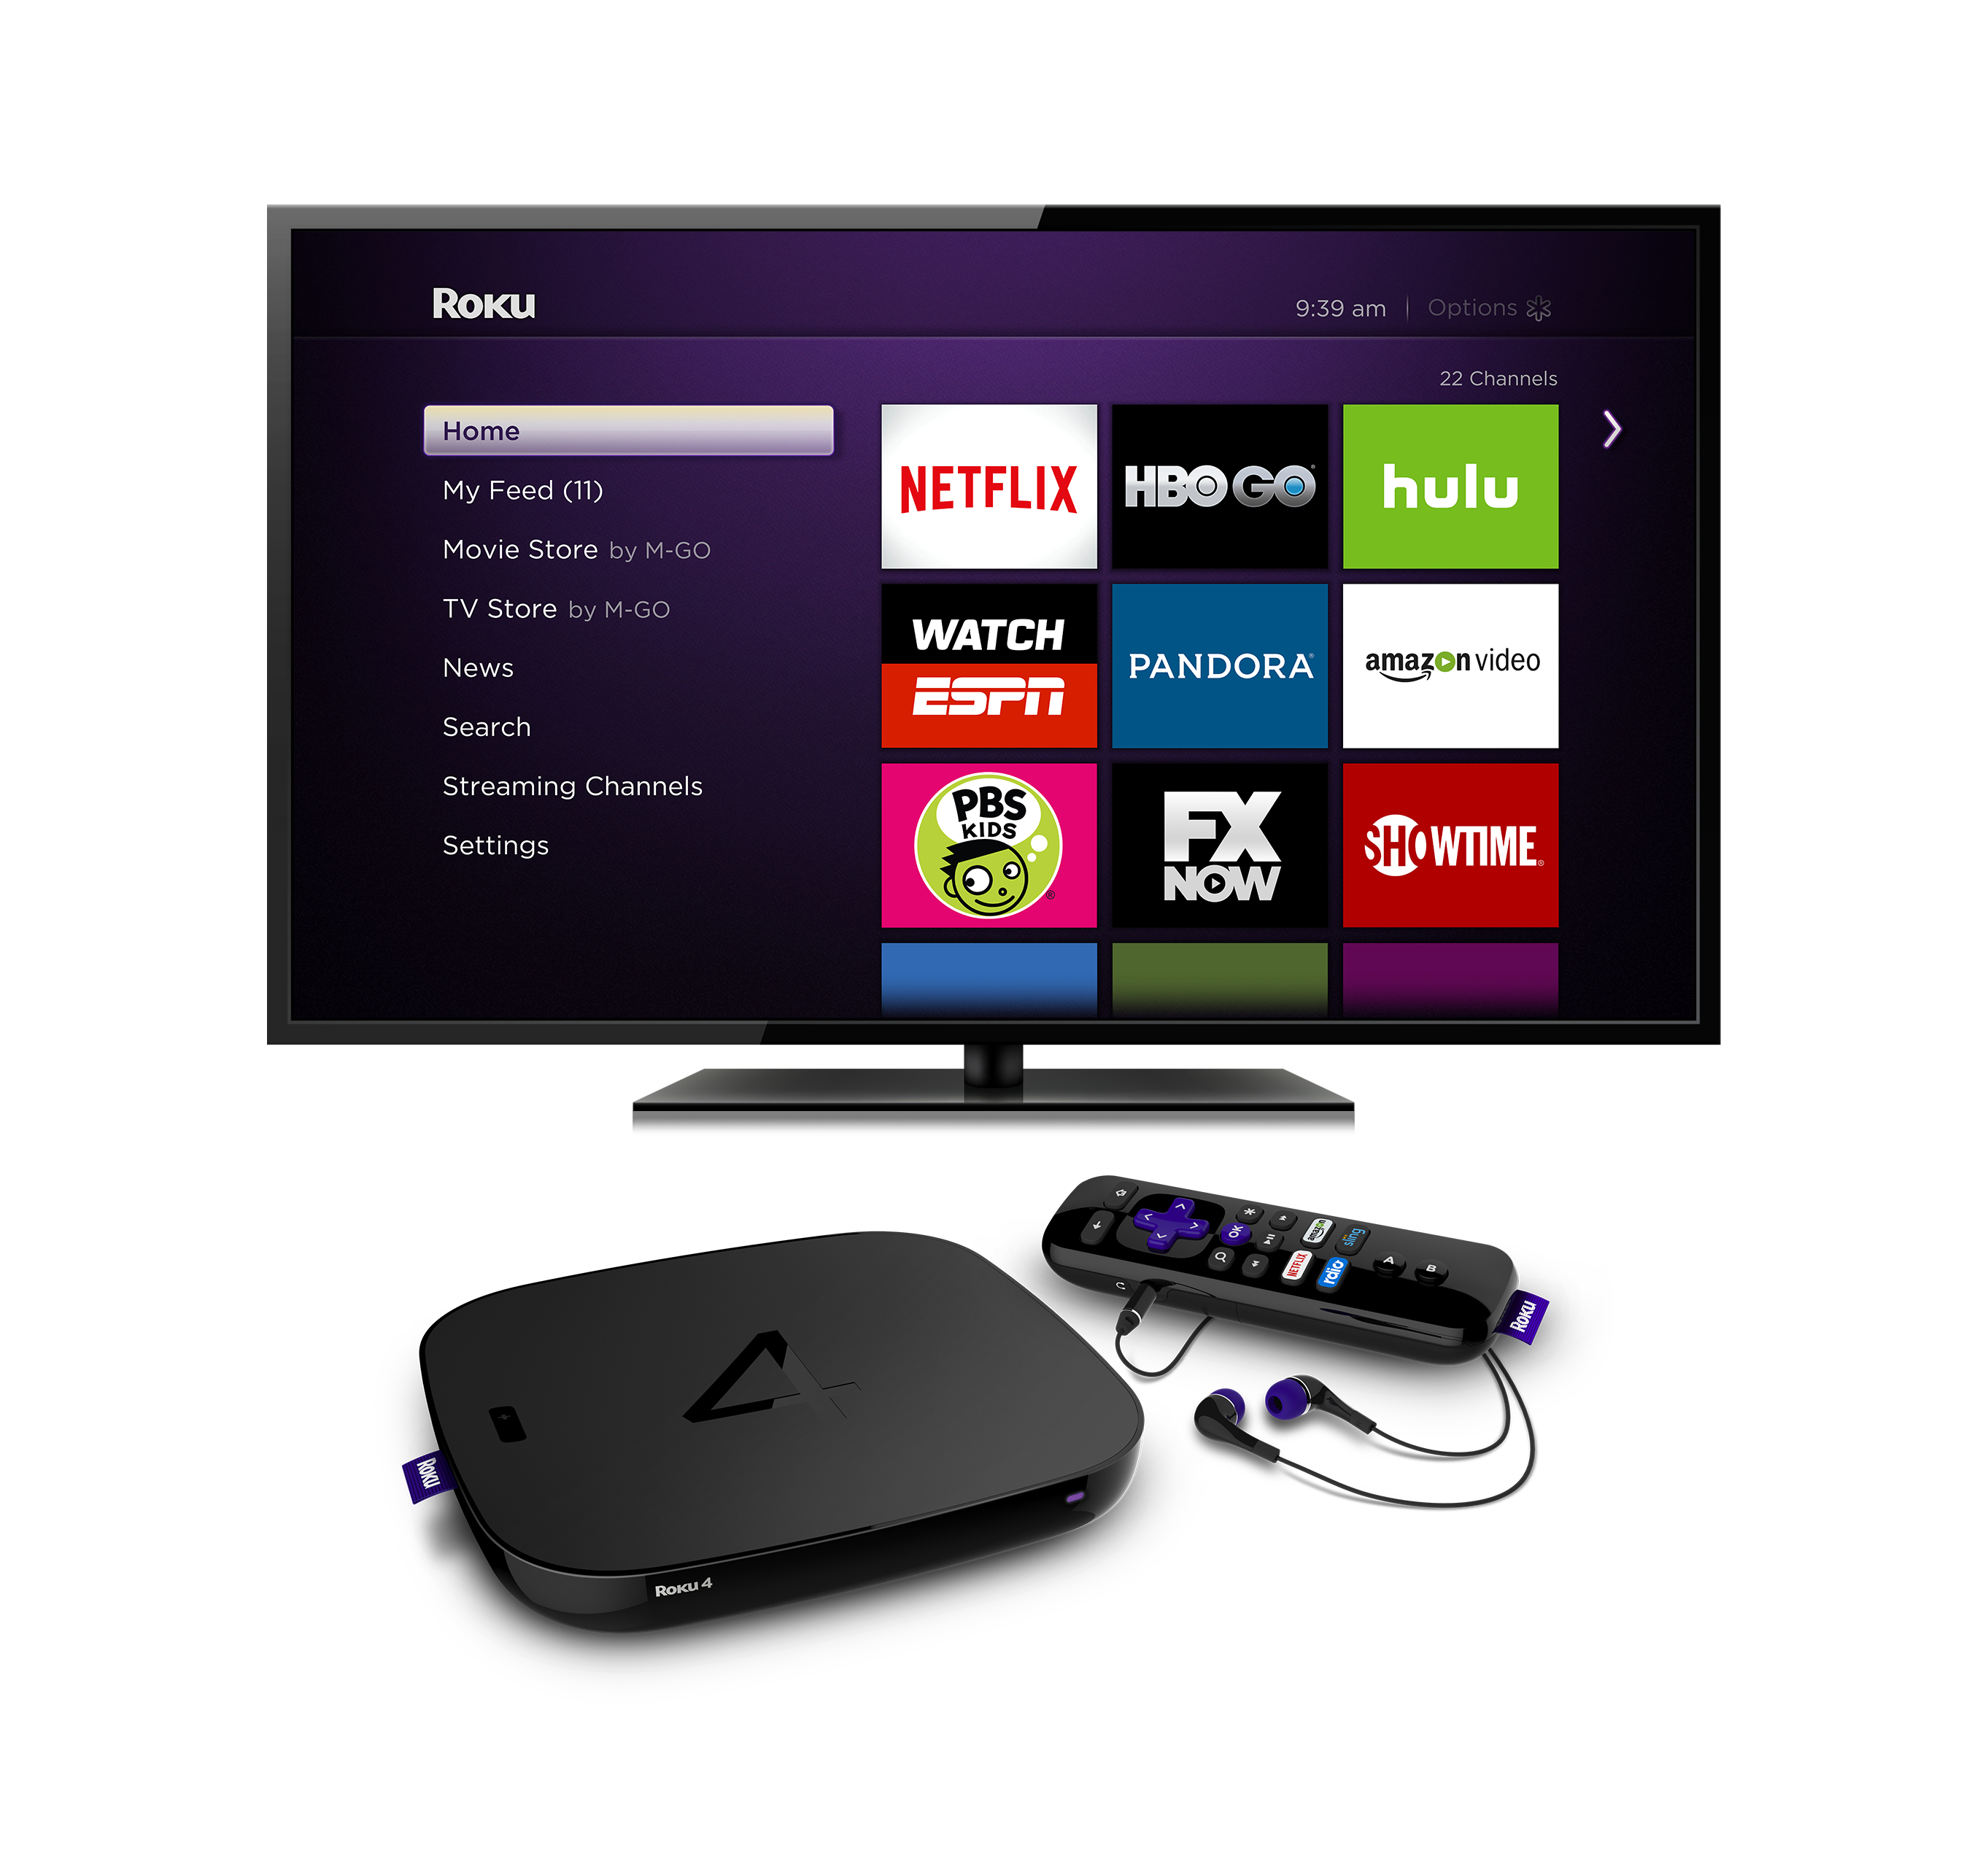 Roku unveils its first-ever TVs designed and built by the company